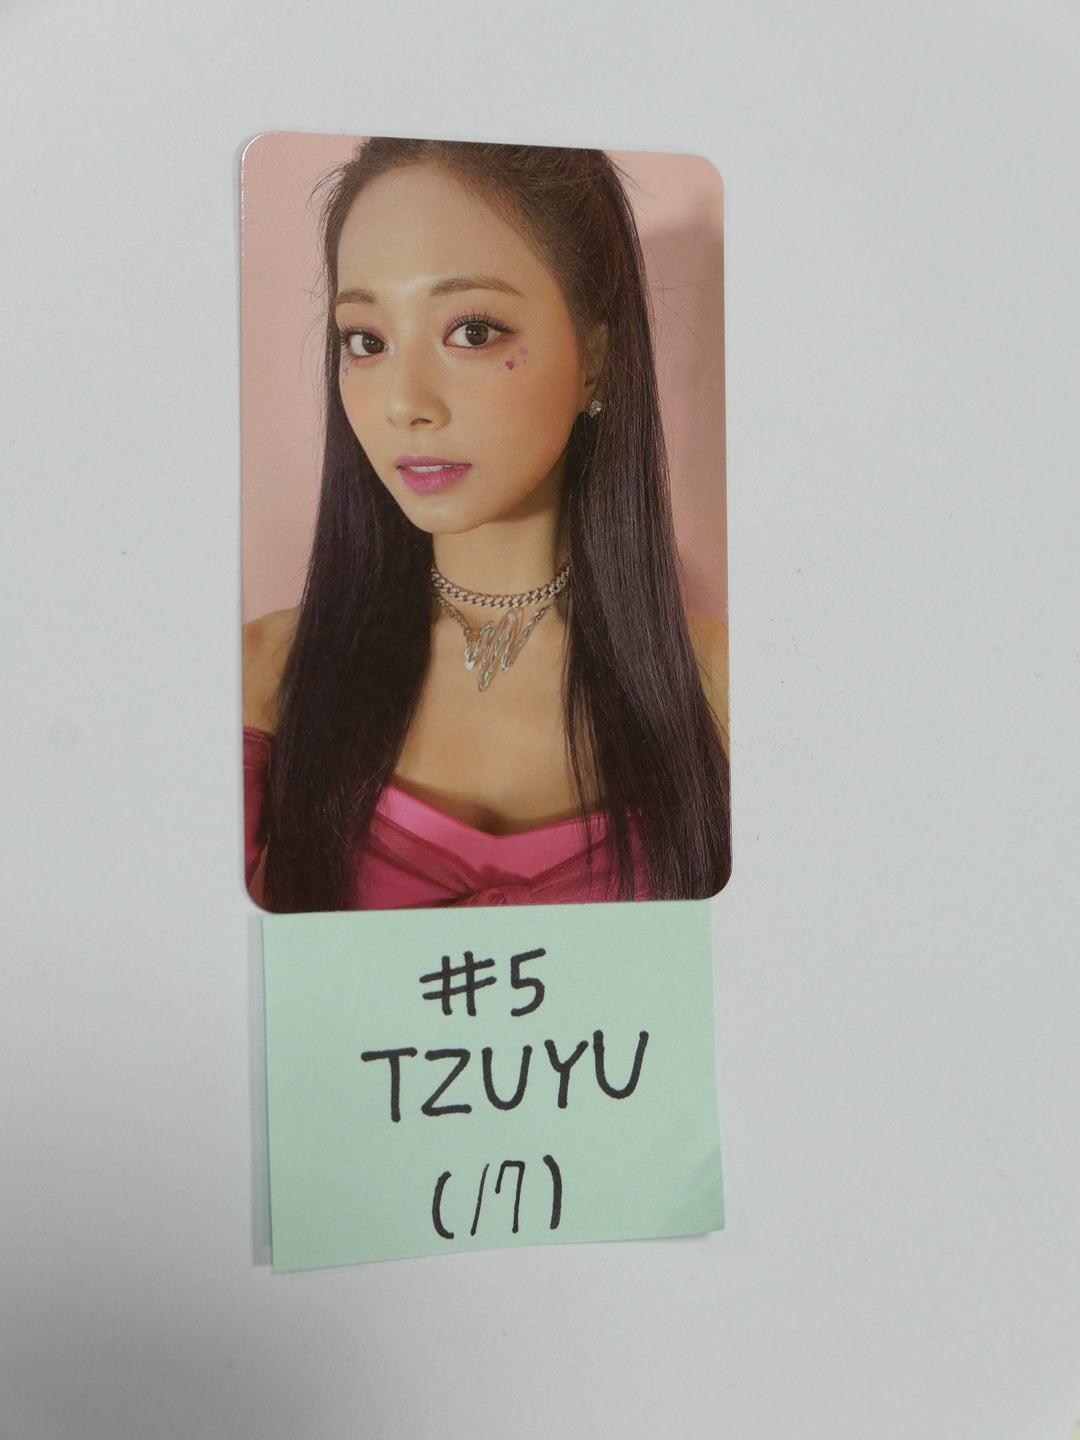 TWICE 'Formula of Love: O+T=<3' - Official Photocard [Tzuyu, Chaeyoung, Nayeon]